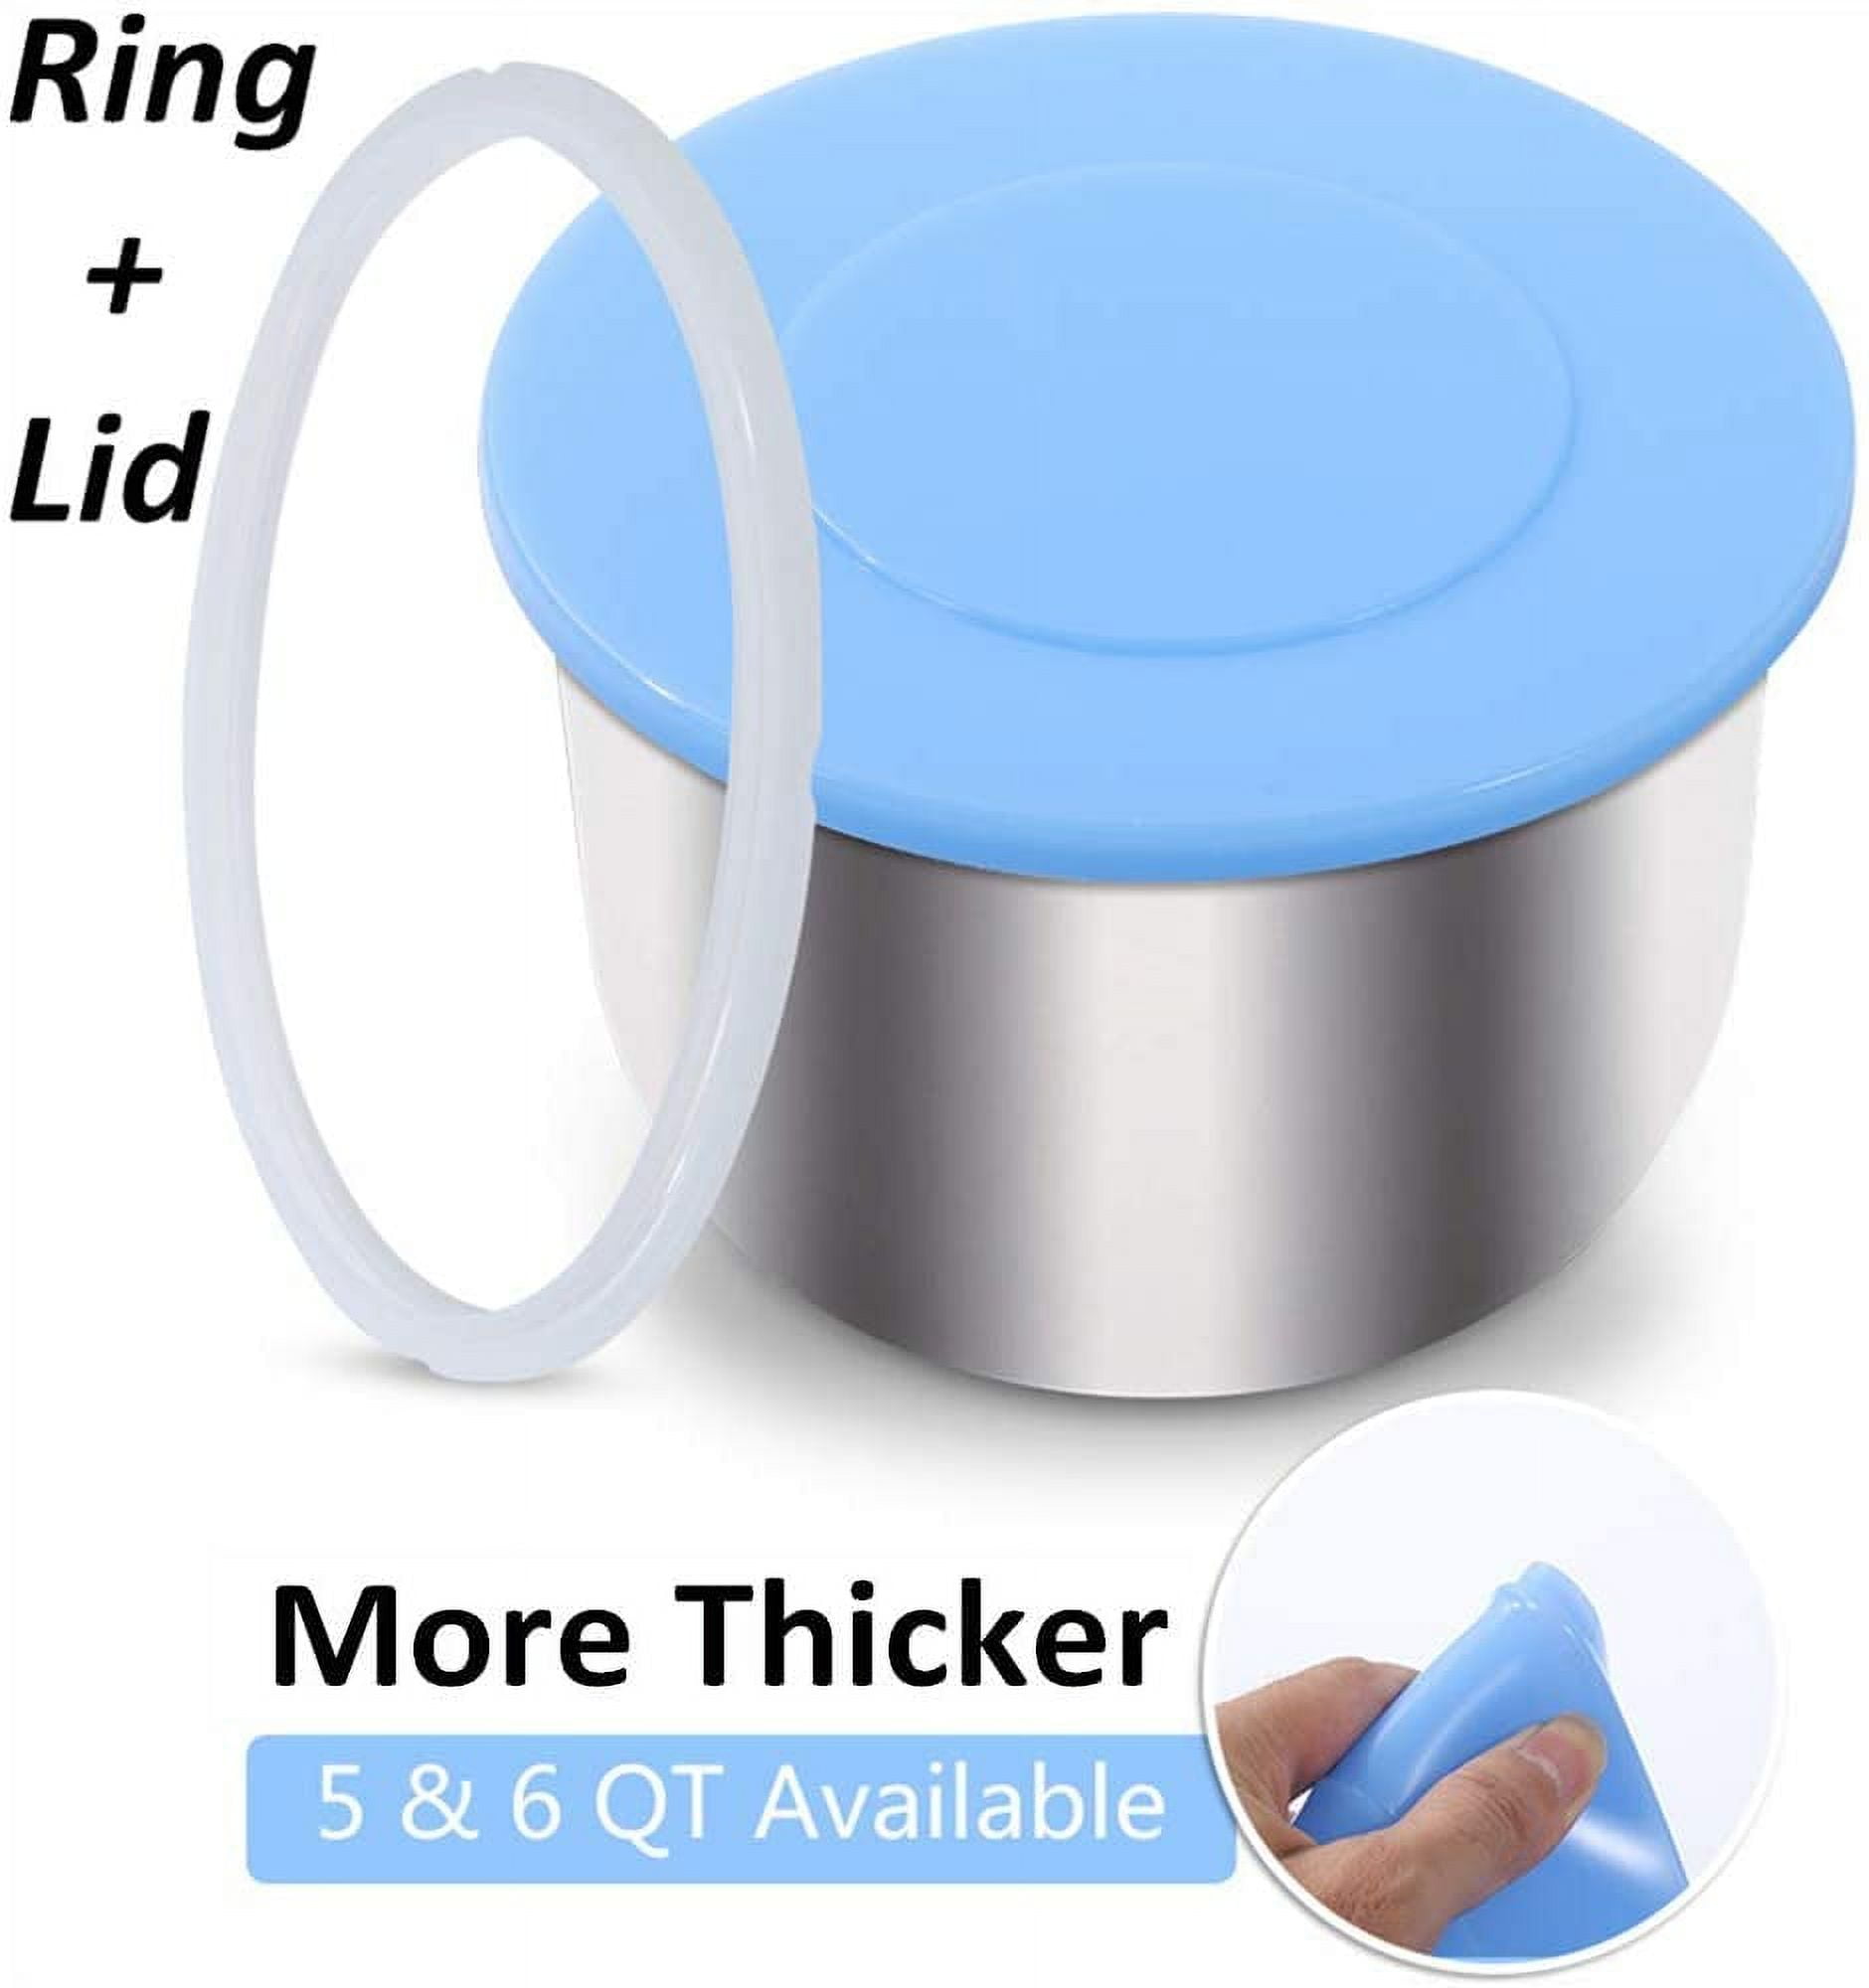 Instant Pot - SILICONE ACCESSORIES SALE!! SAVE 20% on your favorite Instant  Pot​ silicone accessories on .com​ »  bit.ly/IP_Silicone_AccessoriesSale - Genuine Instant Pot Mini Mitts -  Genuine Instant Pot Silicone Springform Cake